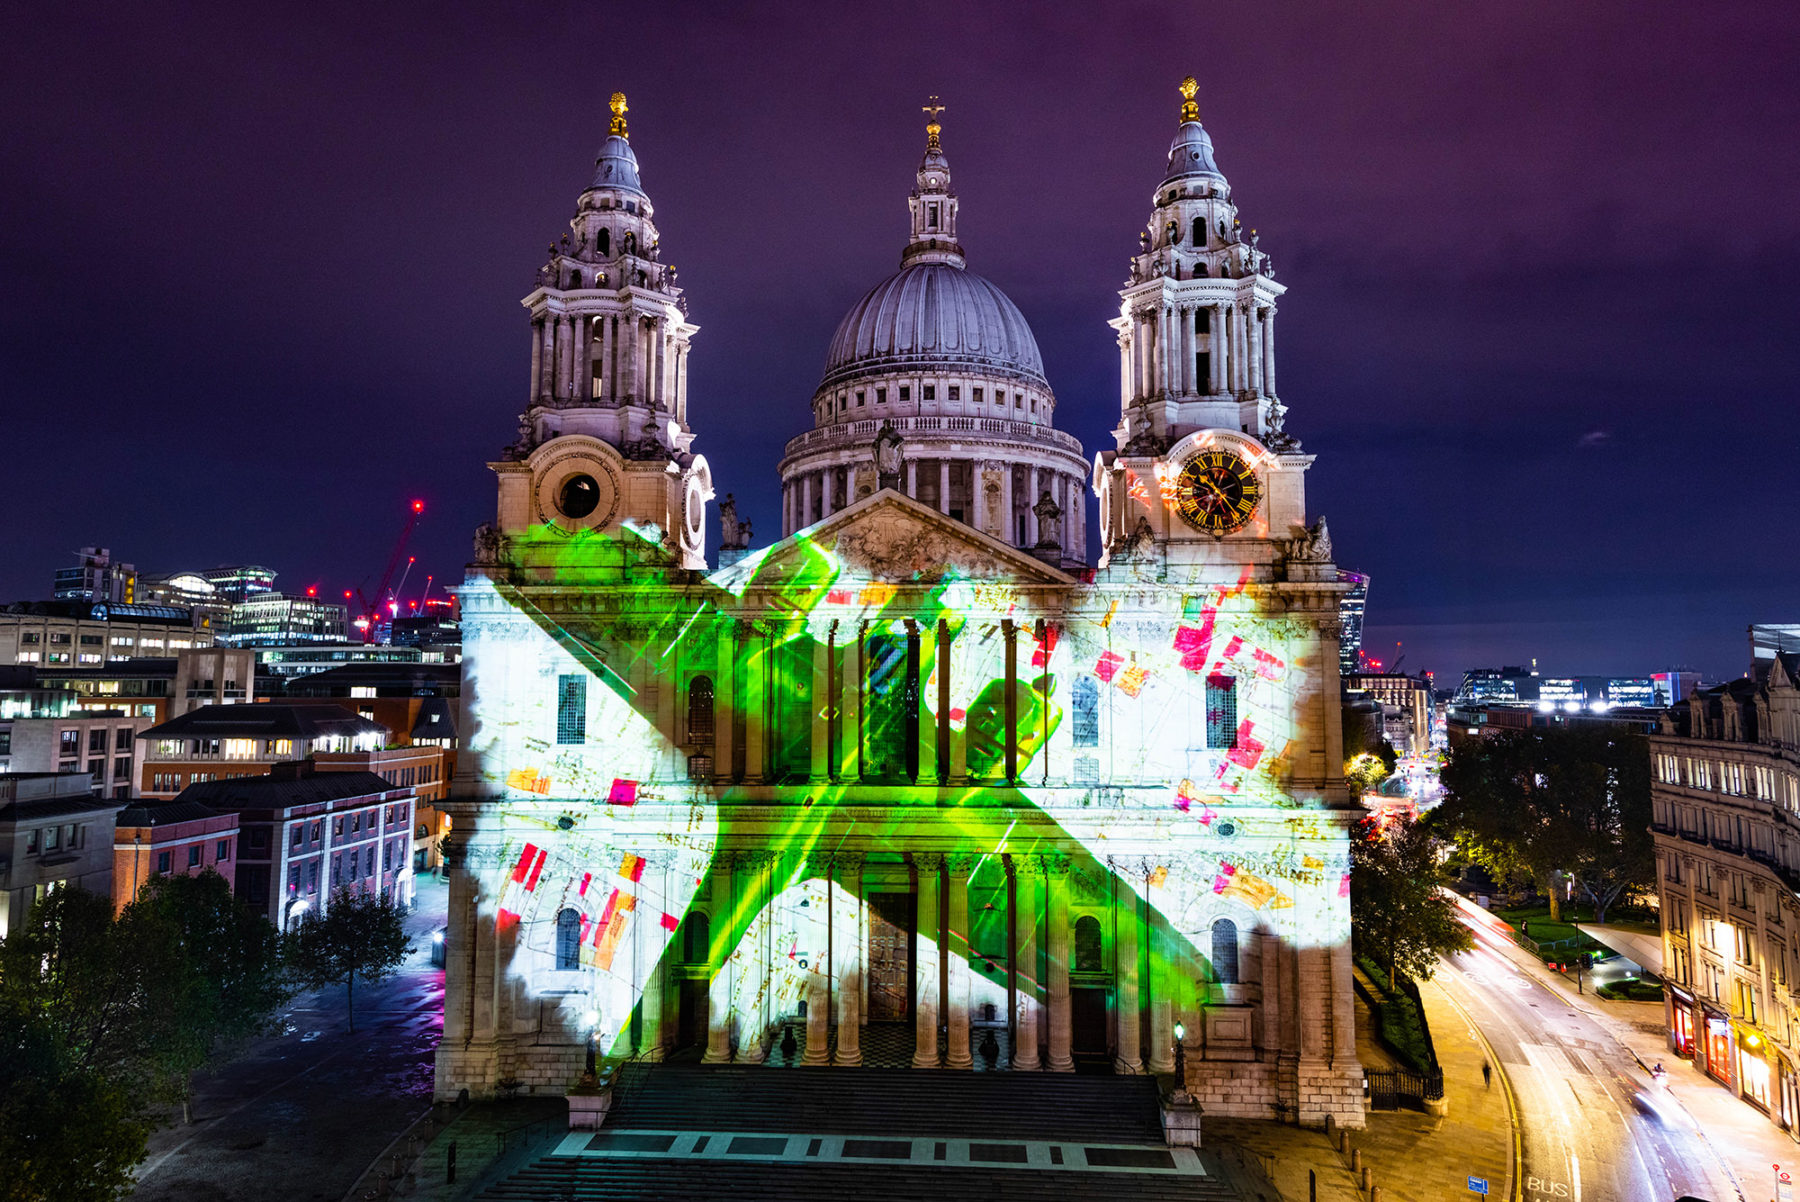 image: Where_Light_Falls_london_projection_mapping_england_light_show_12-1800x1202